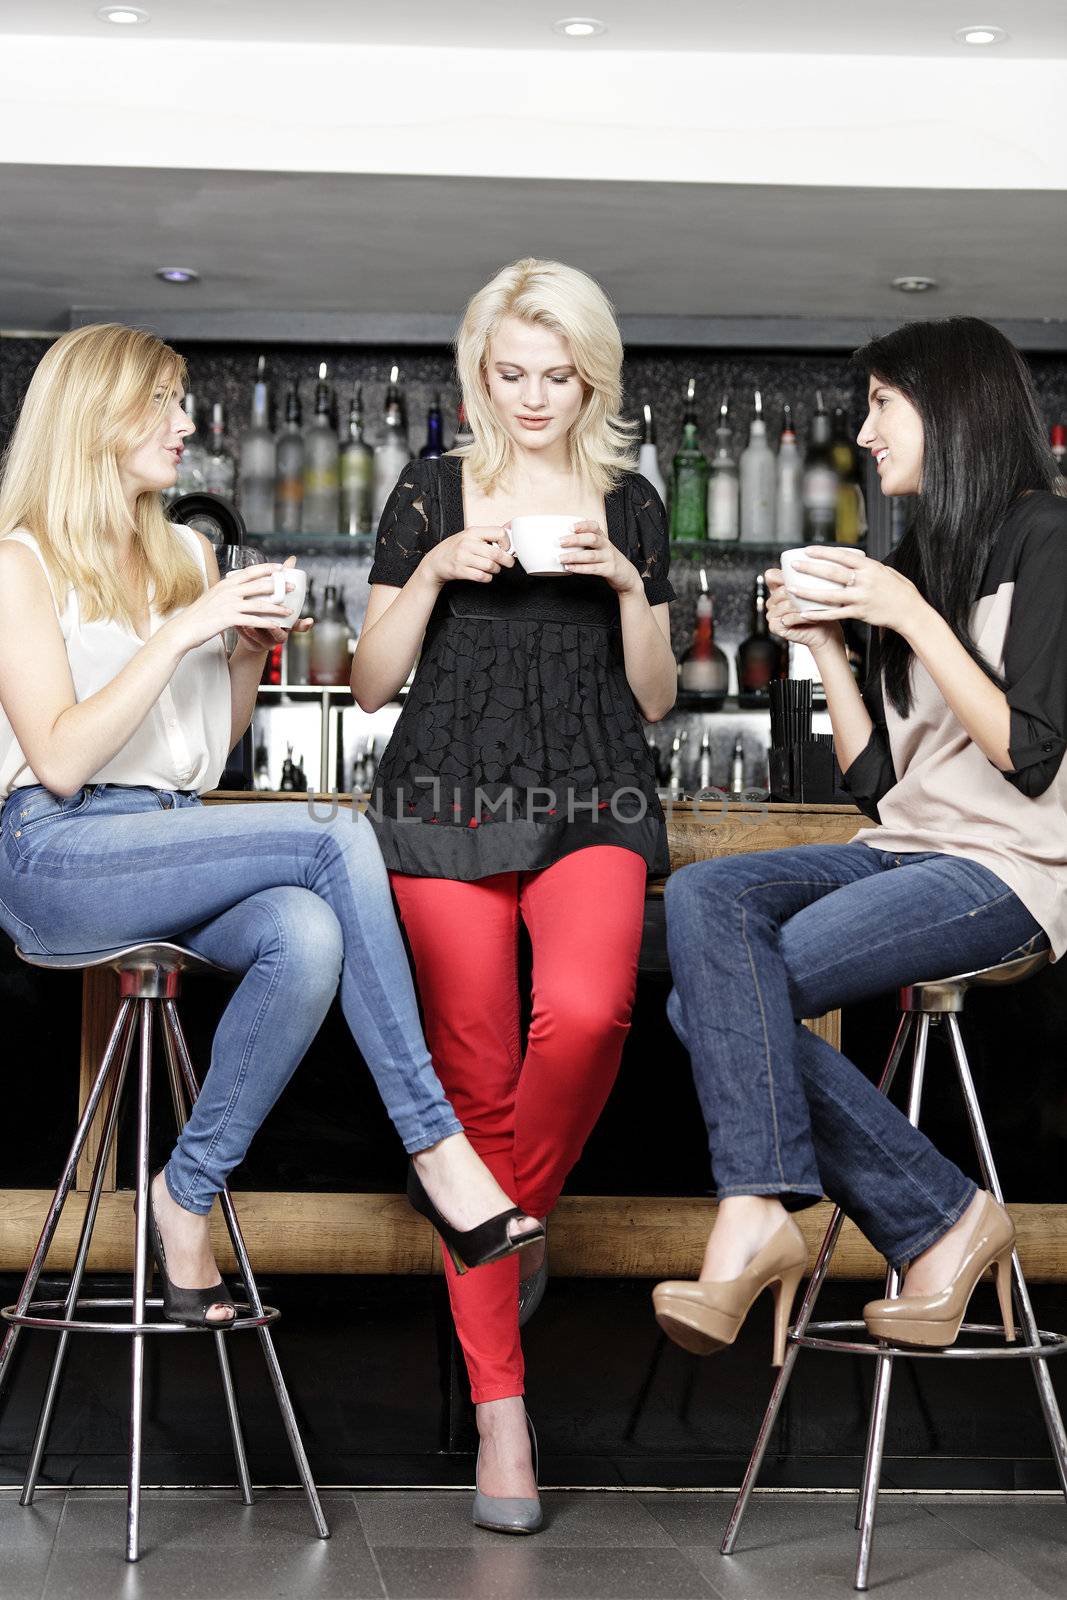 Women chatting over coffee at wine bar by studiofi